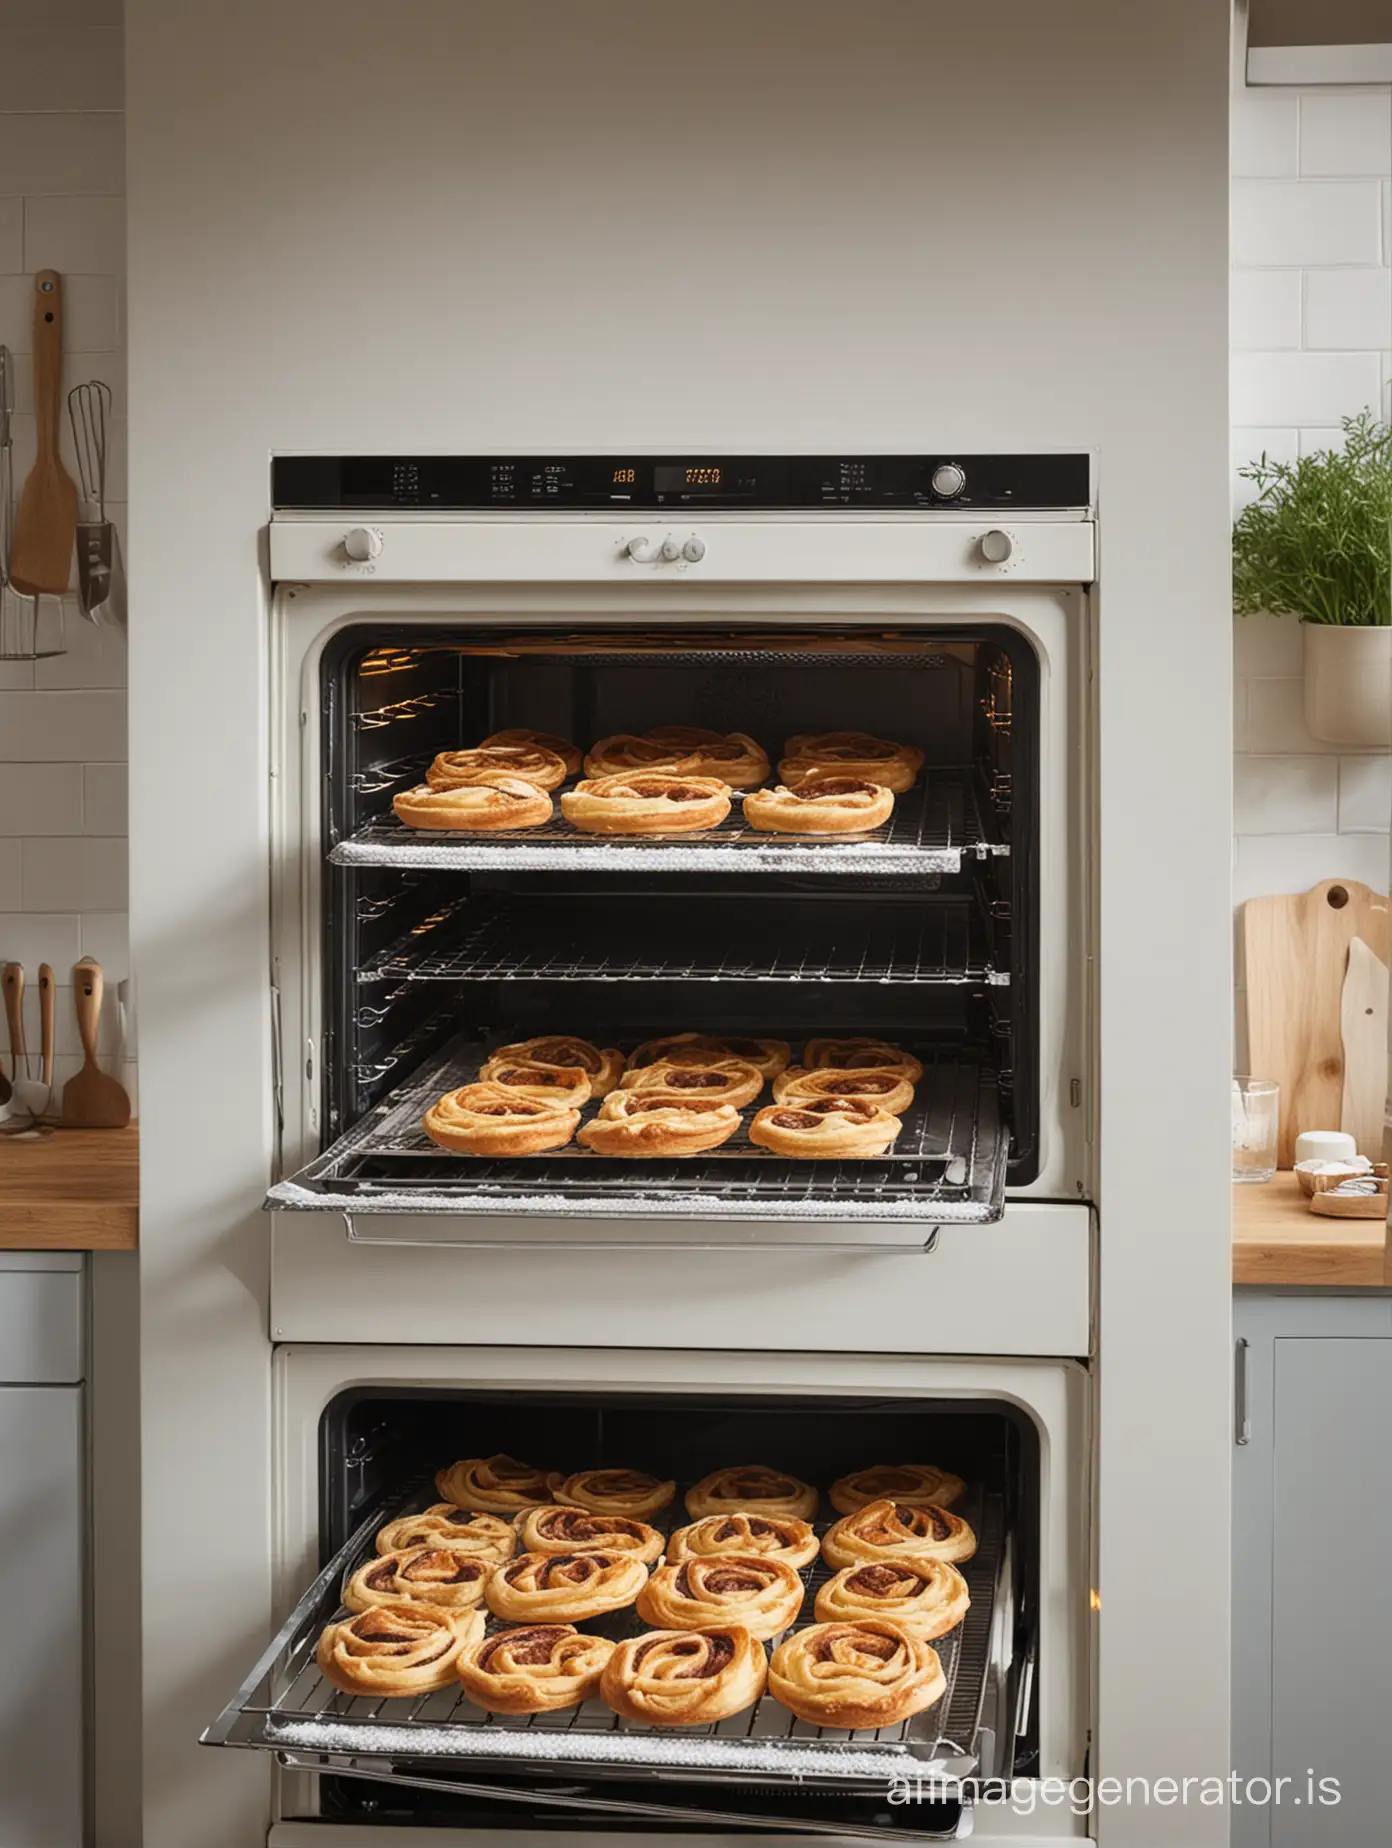 I need a photo of a large oven in a kitchen if possible. With pastry accessories on the table.